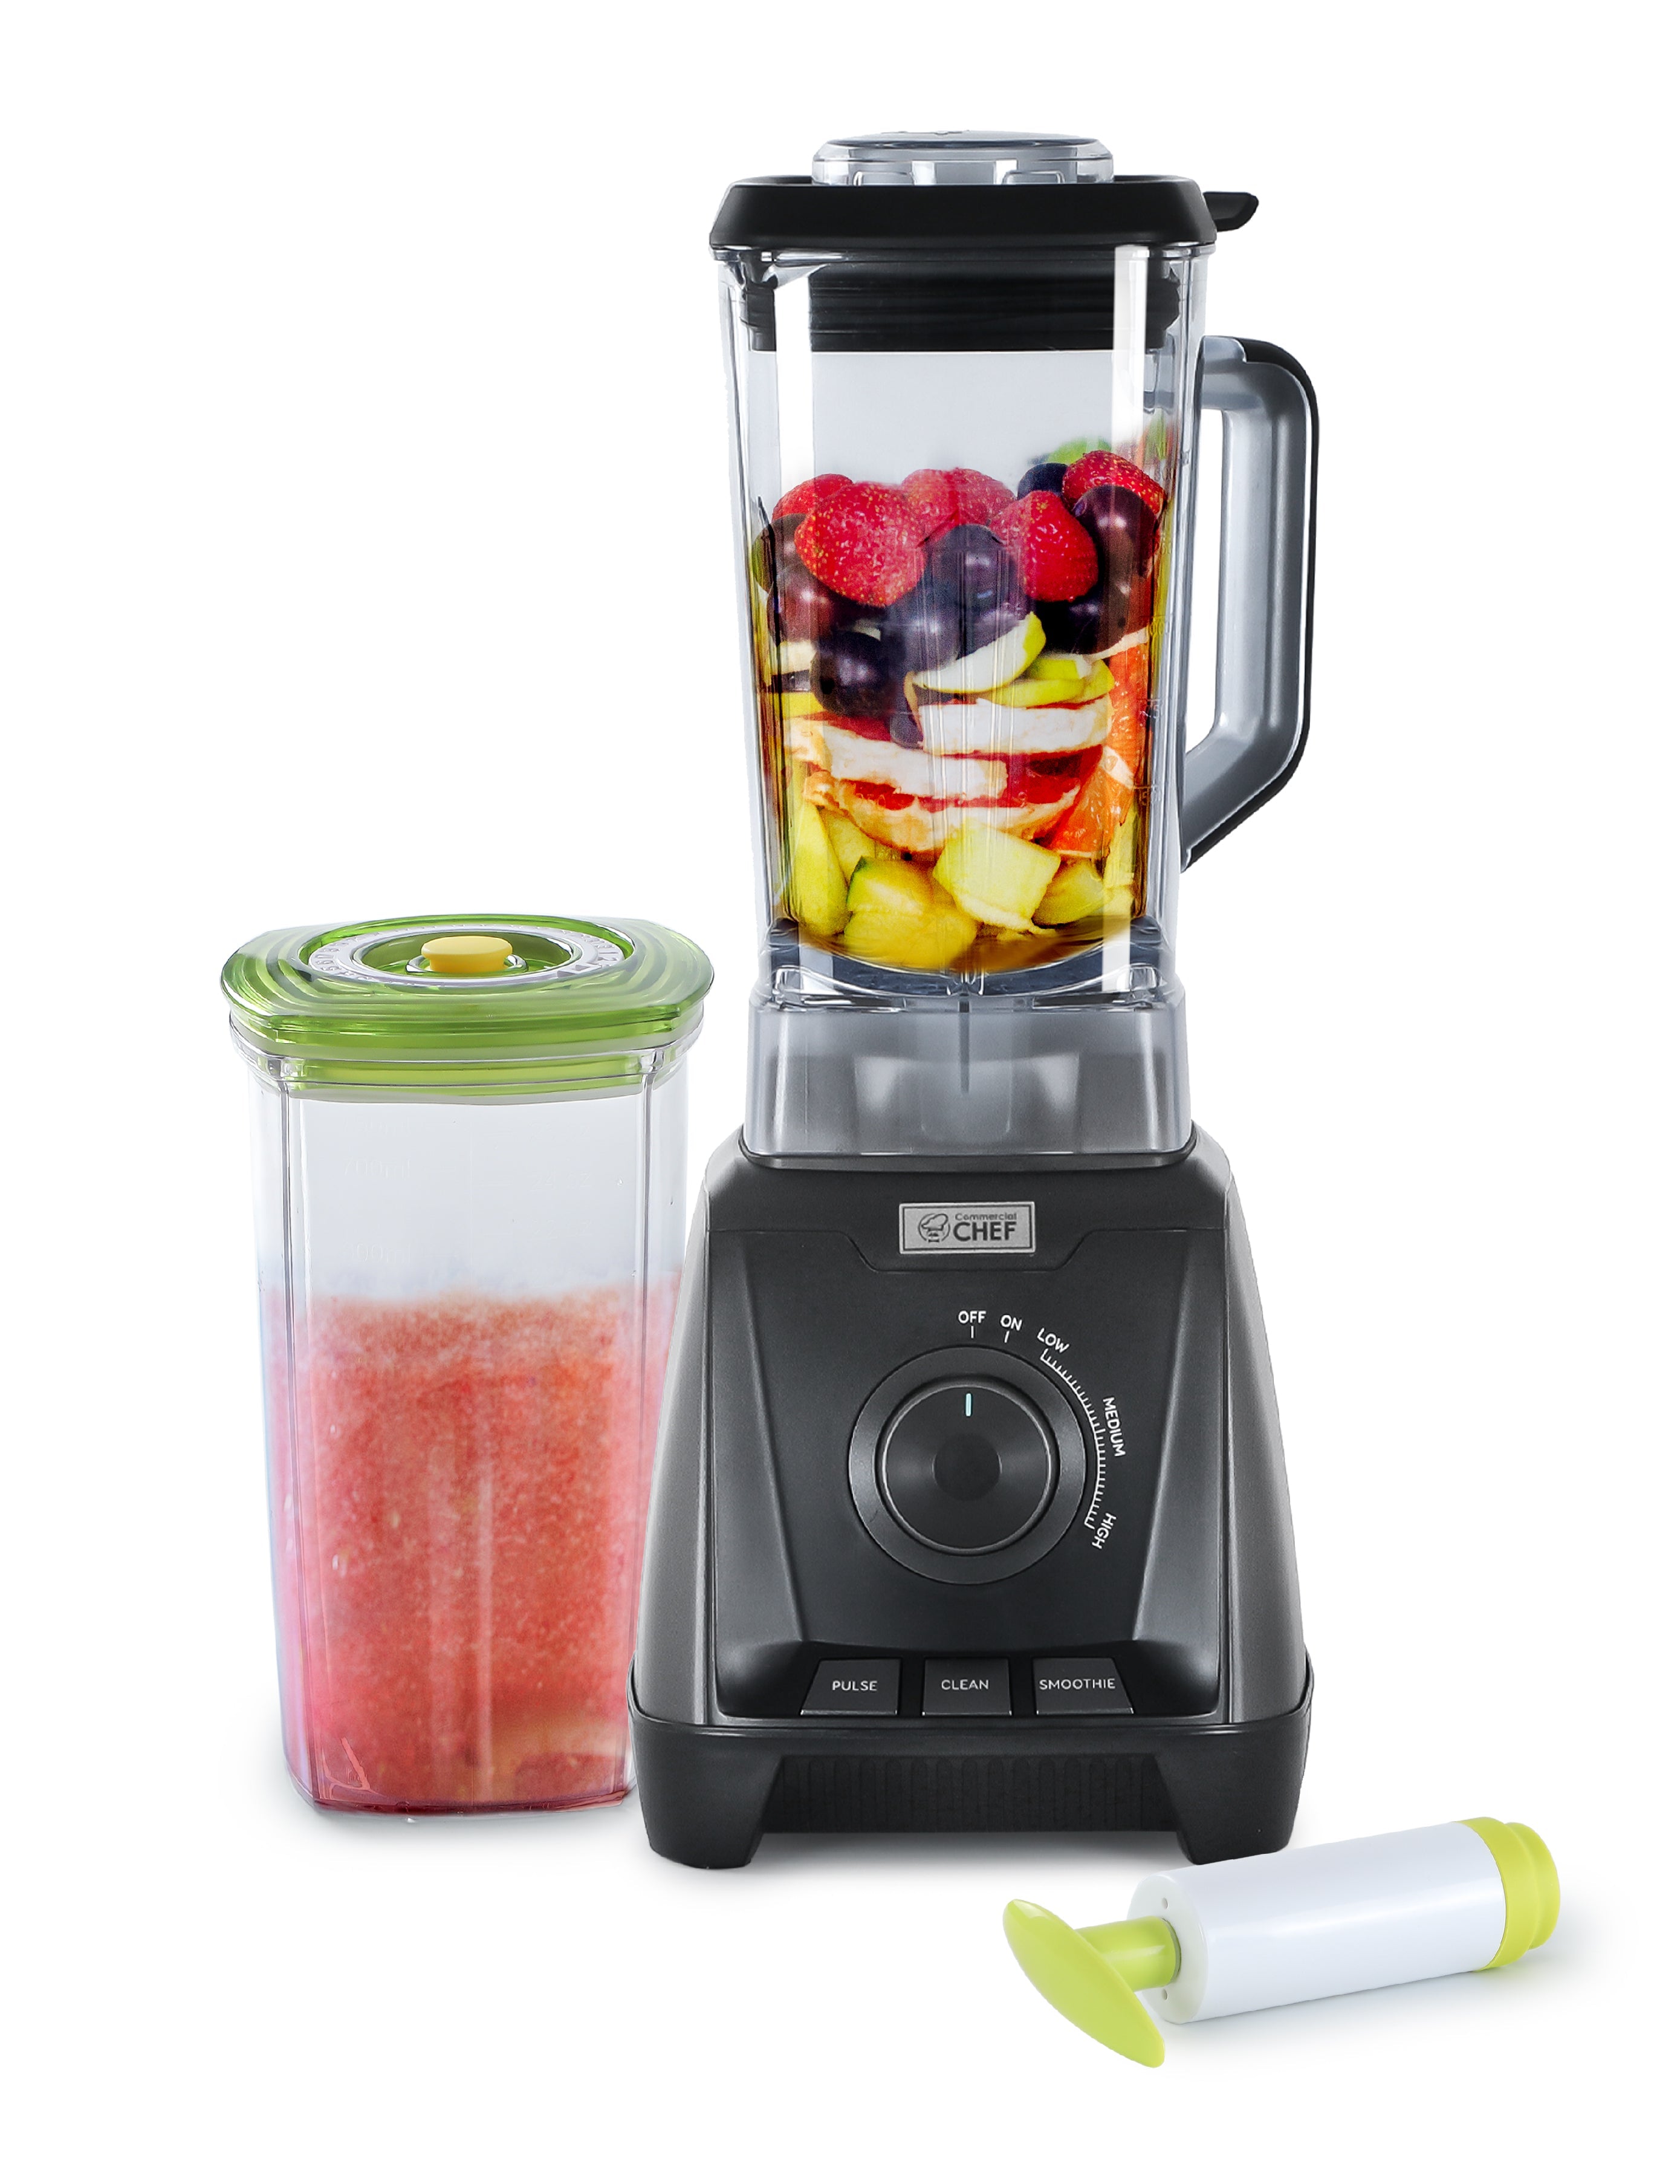 COMMERCIAL CHEF High Power Blender 1200W with Steel Housing, Black